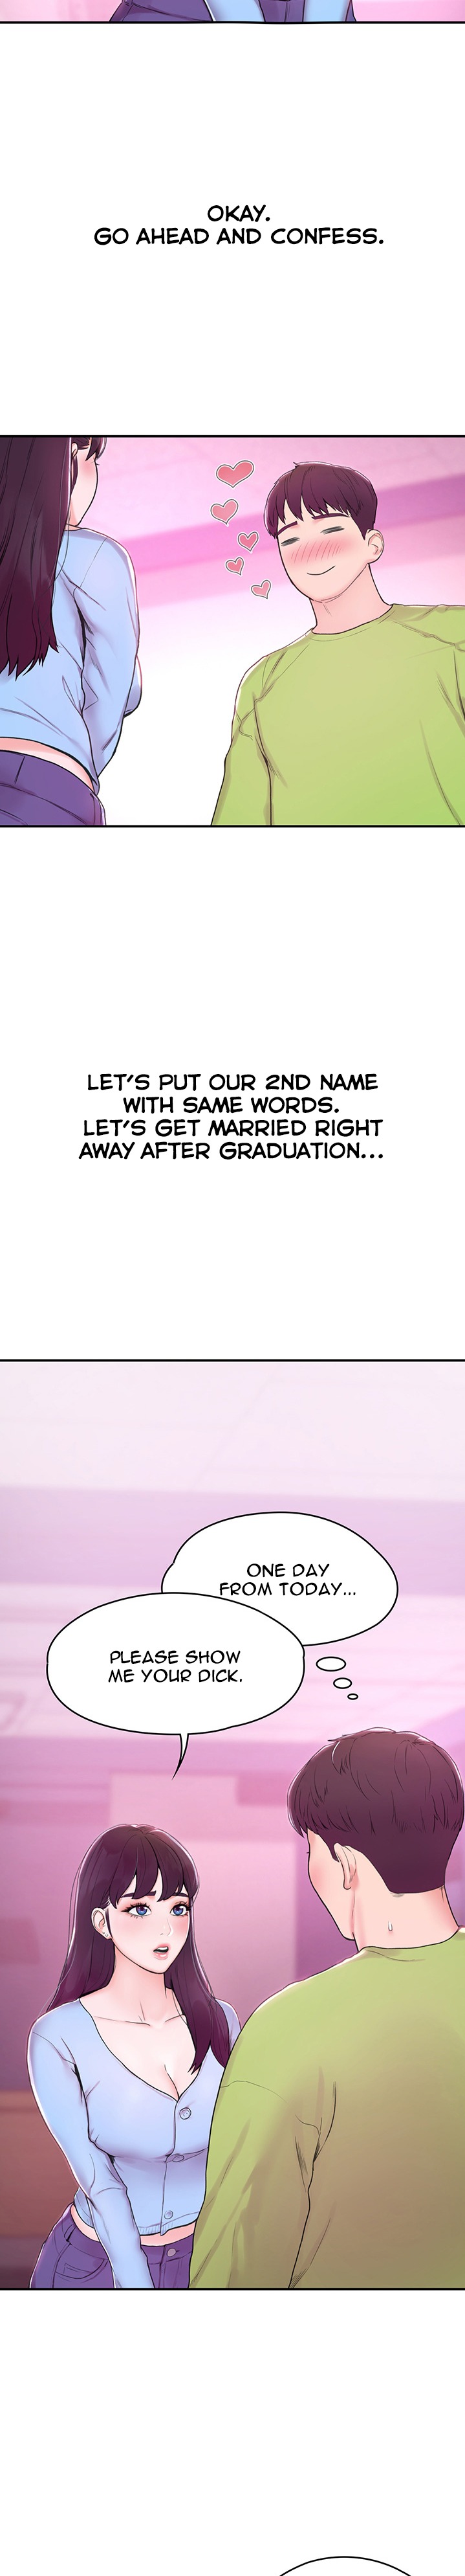 Campus Today Chapter 1 - Page 3